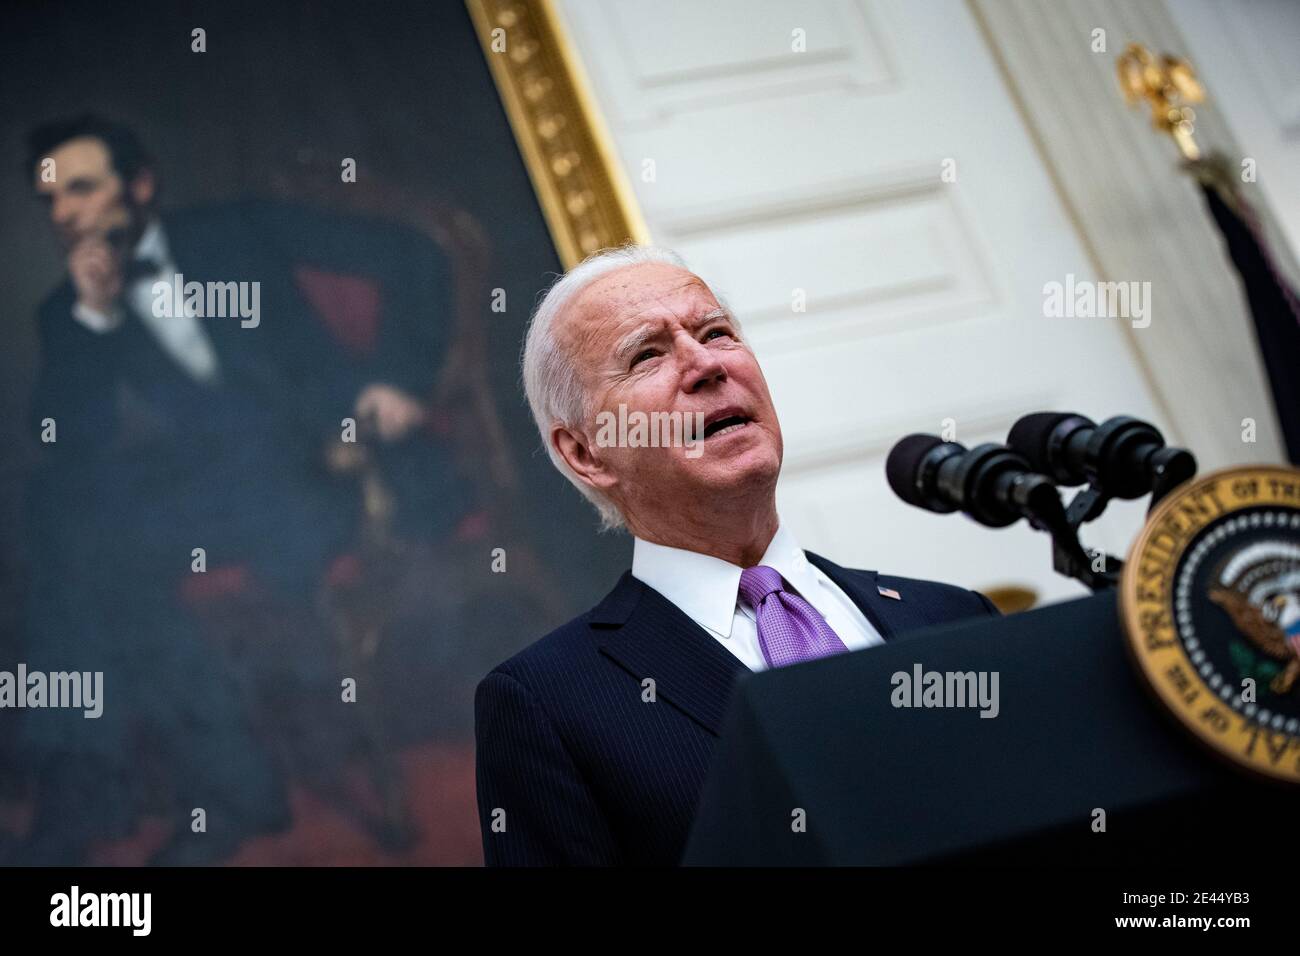 U.S. President Joe Biden speaks on his administration's Covid-19 response in the State Dining Room of the White House in Washington, DC, U.S., on Thursday, Jan. 21, 2021. Biden in his first full day in office plans to issue a sweeping set of executive orders to tackle the raging Covid-19 pandemic that will rapidly reverse or refashion many of his predecessor's most heavily criticized policies. Credit: Al Drago/Pool via CNP /MediaPunch Stock Photo